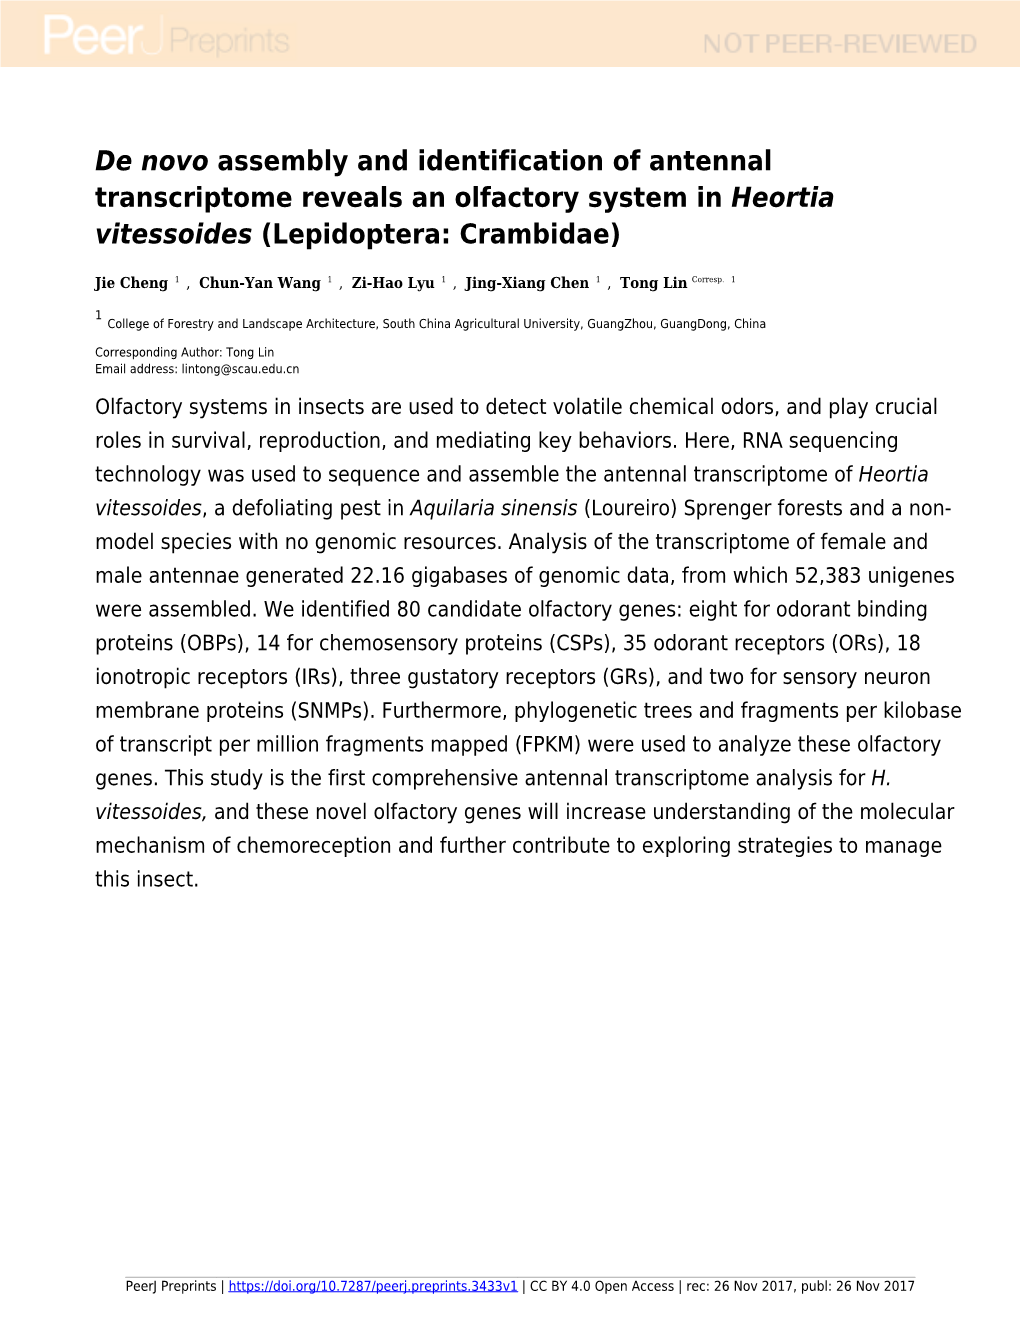 Assembly and Identification of Antennal Transcriptome Reveals an Olfactory System in Heortia Vitessoides (Lepidoptera: Crambidae)